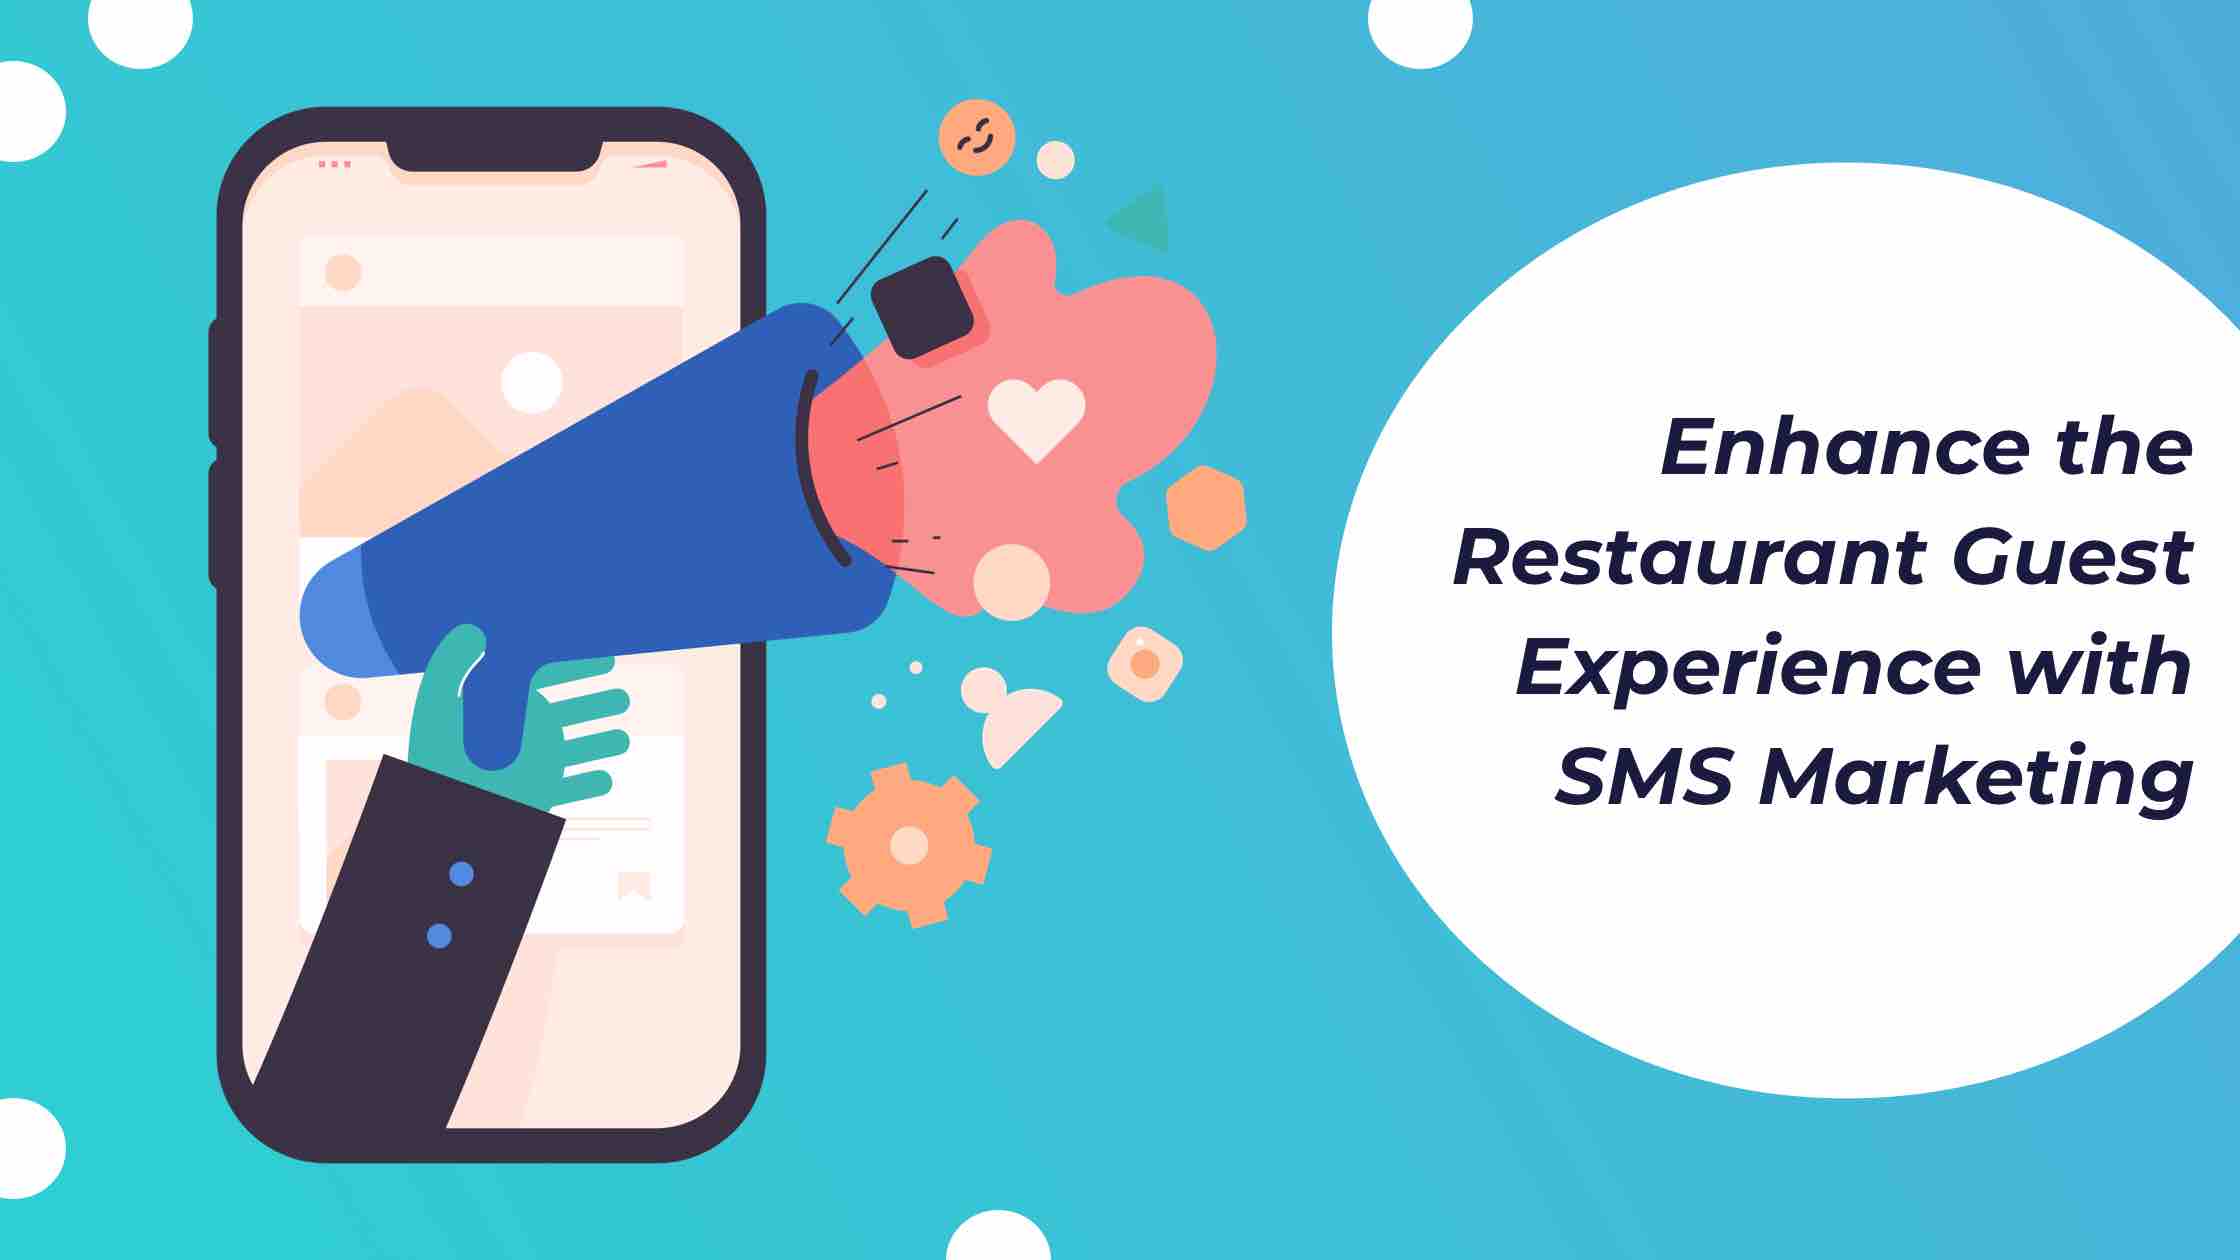 How to Enhance the Restaurant Guest Experience with SMS Marketing